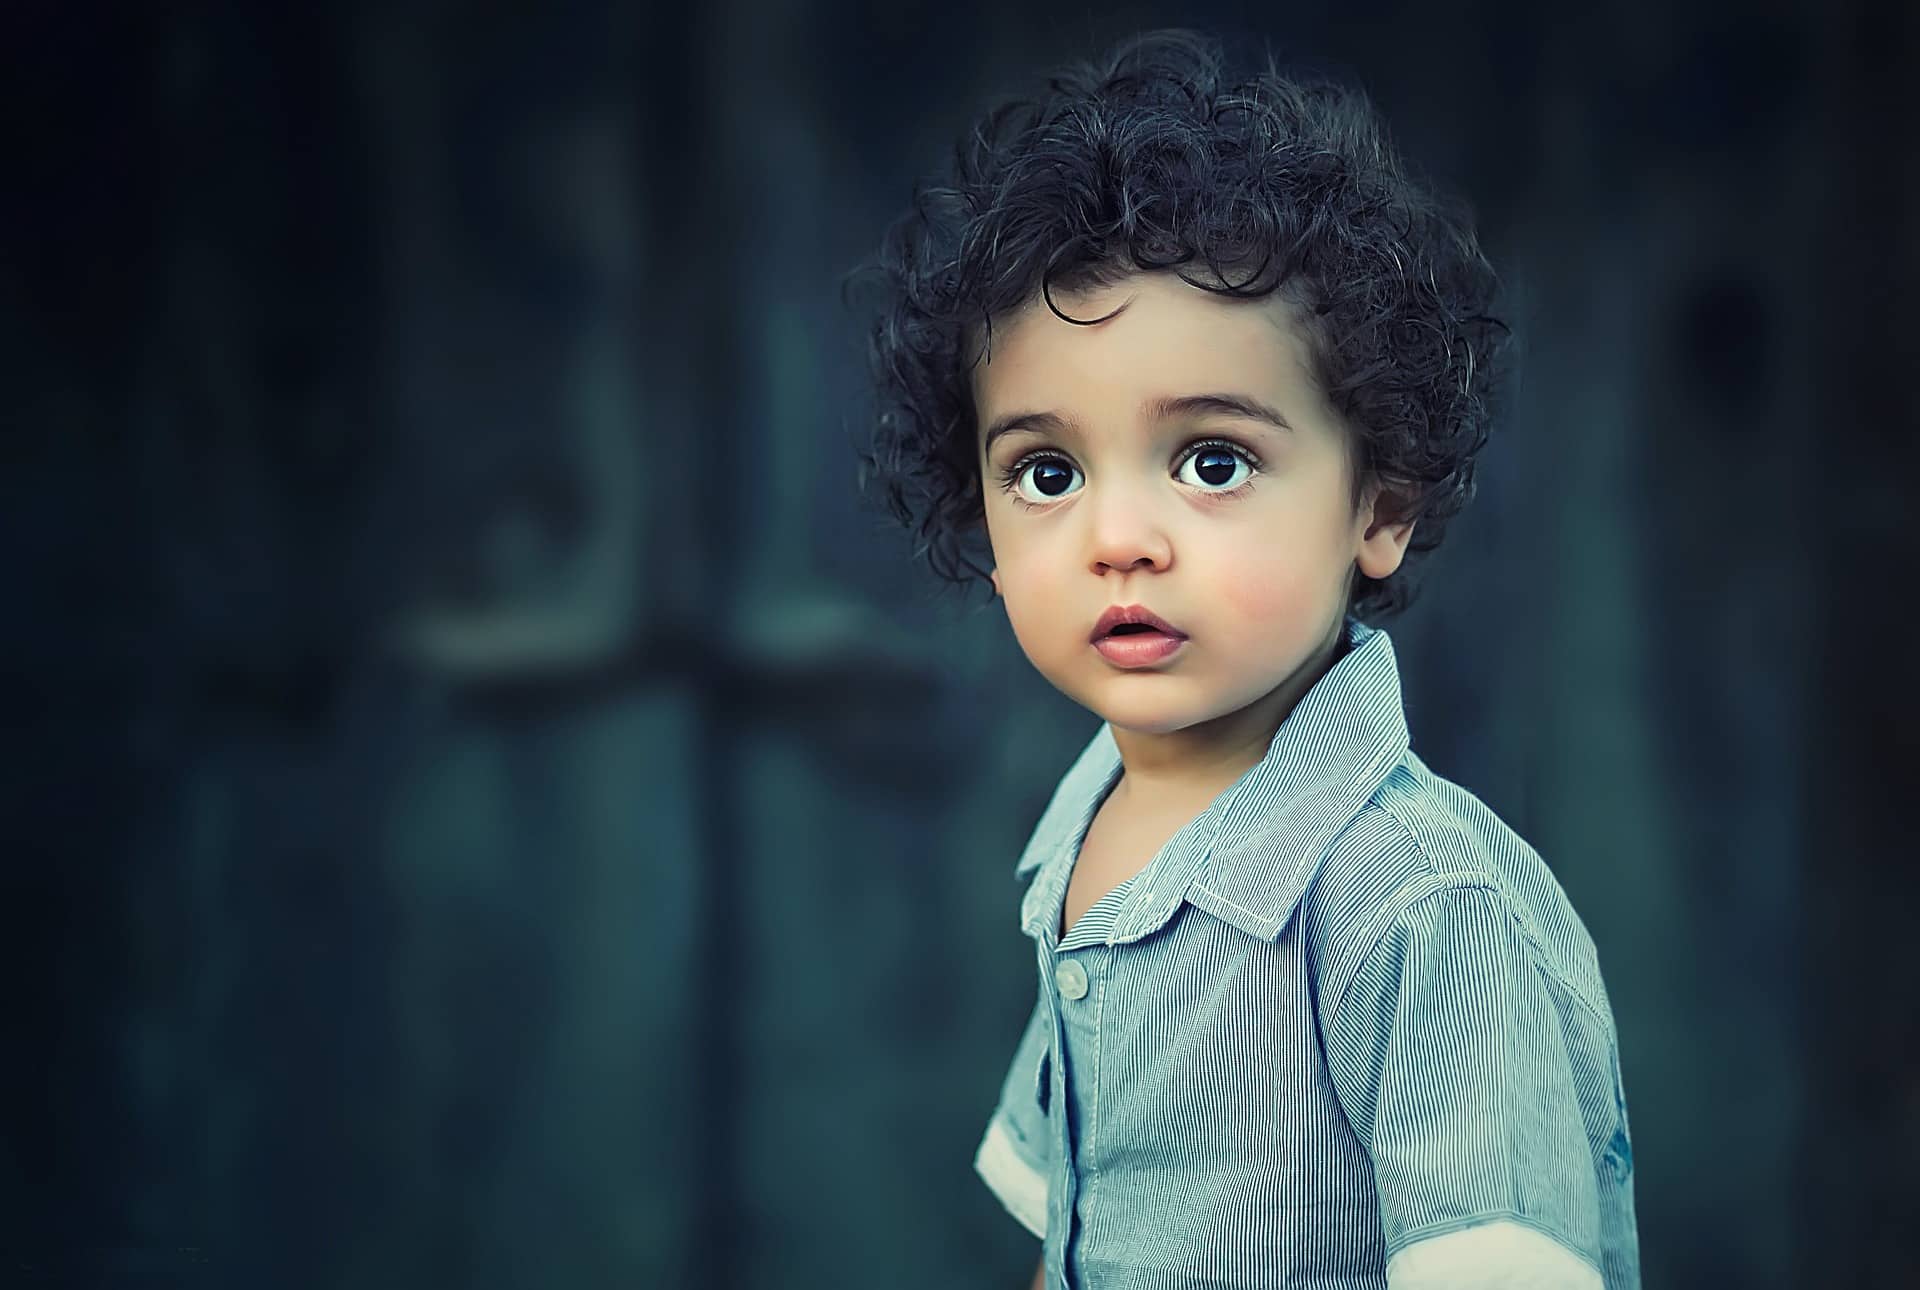 Photo of boy by Bessi for Pixabay